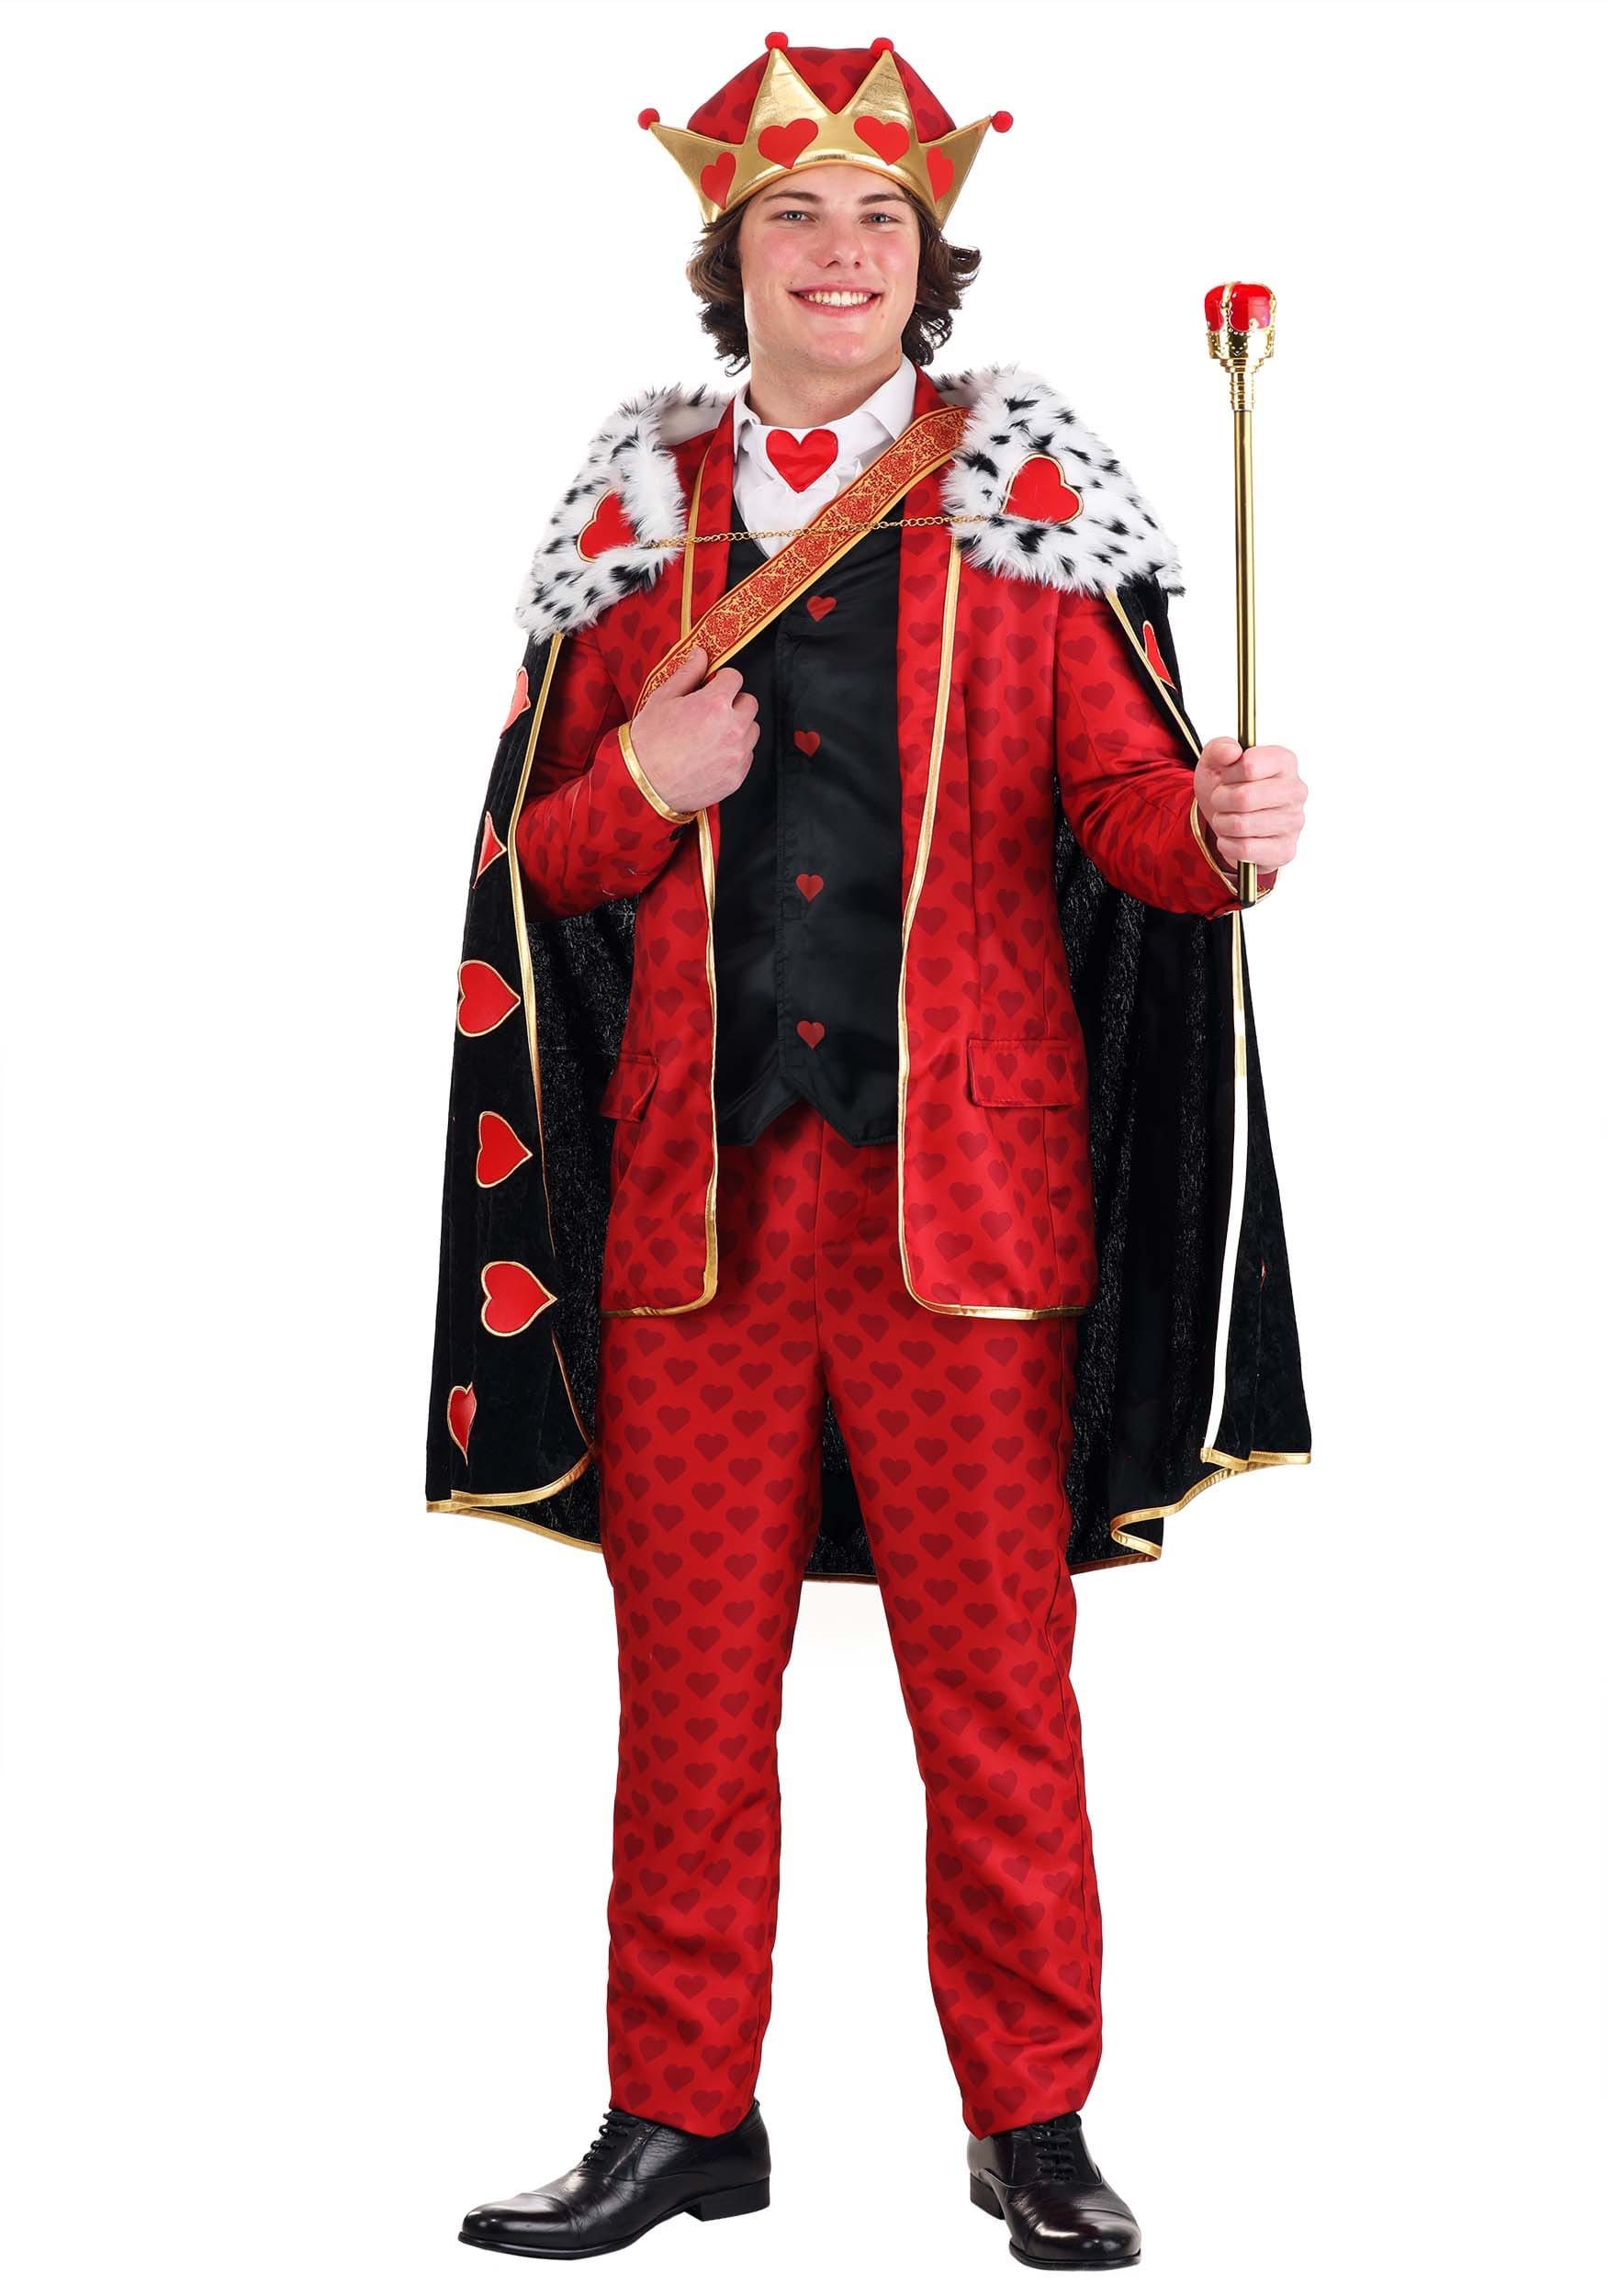 Bare Specially Spicy Premium King of Hearts Adult Costume